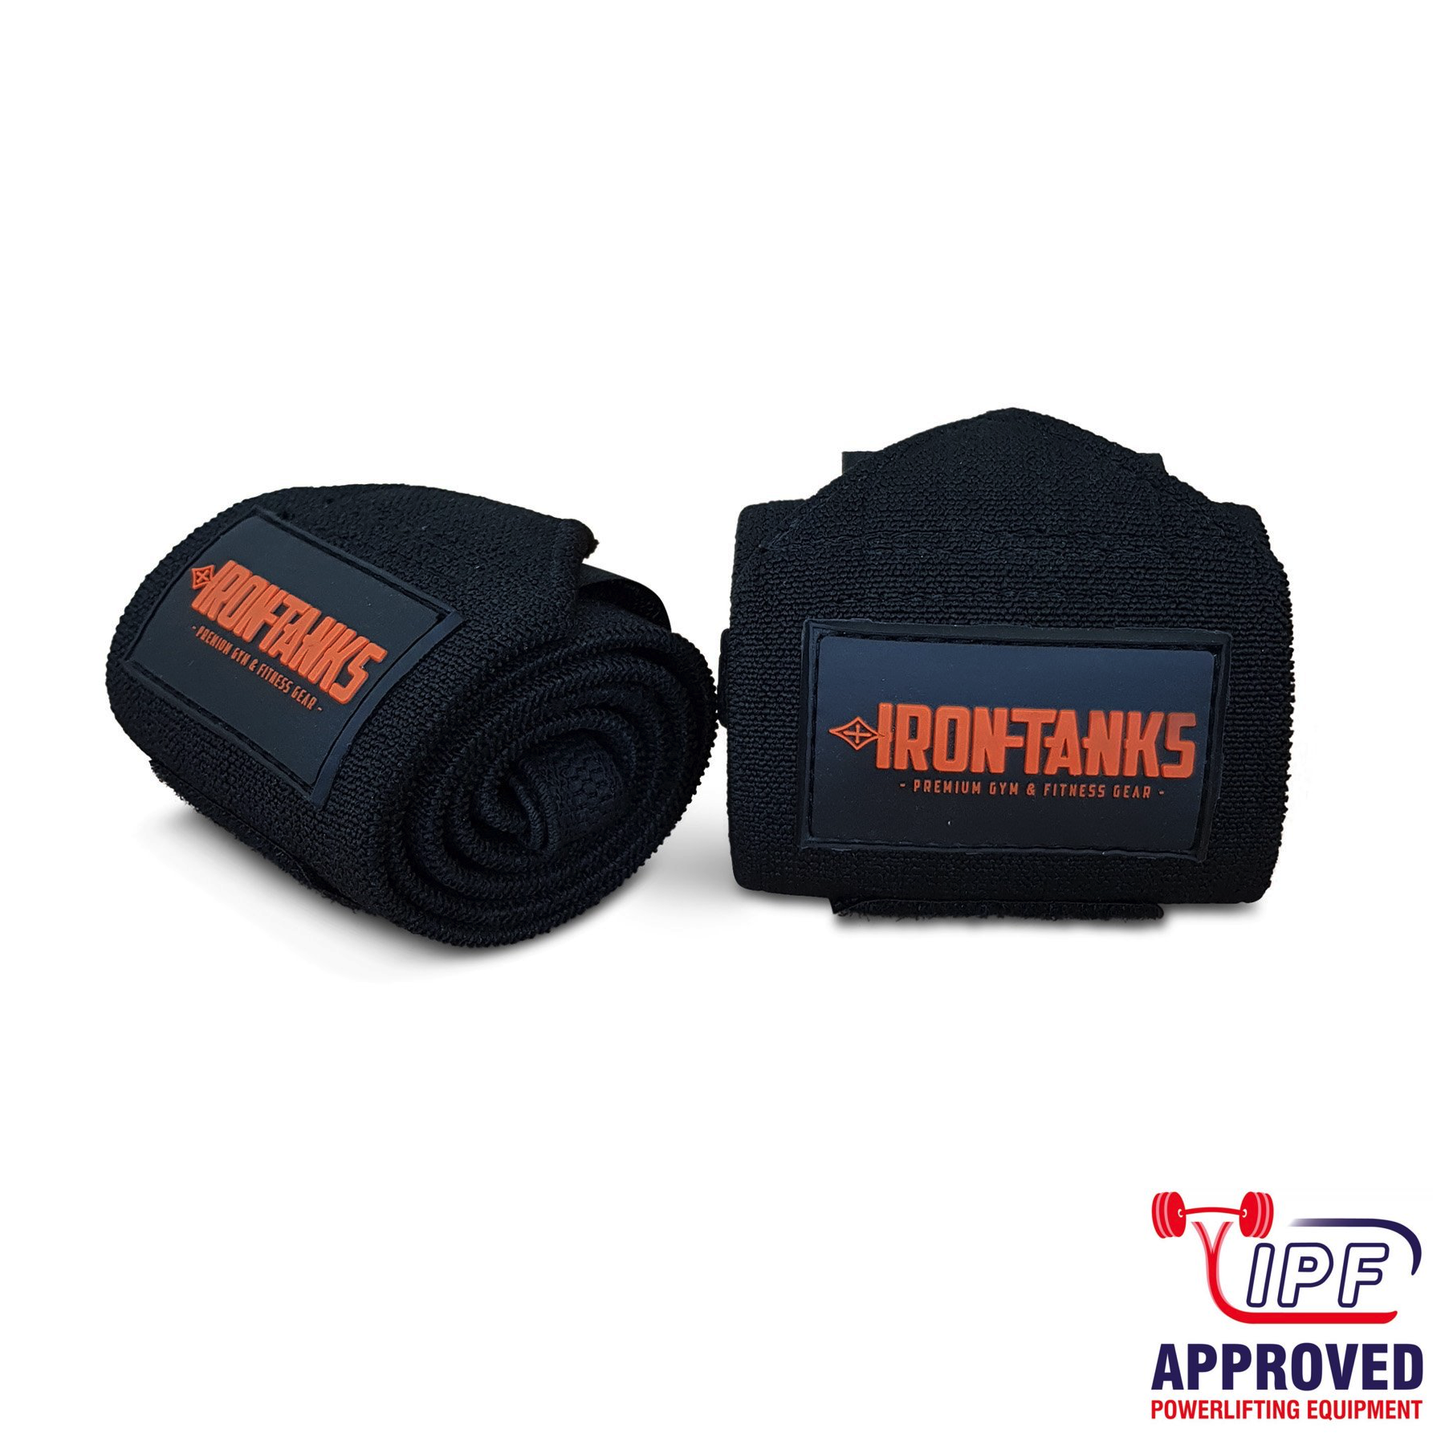 Iron Tanks Ironclad Wrist Wraps (Immortal Black) - IPF APPROVED - 9 for 9